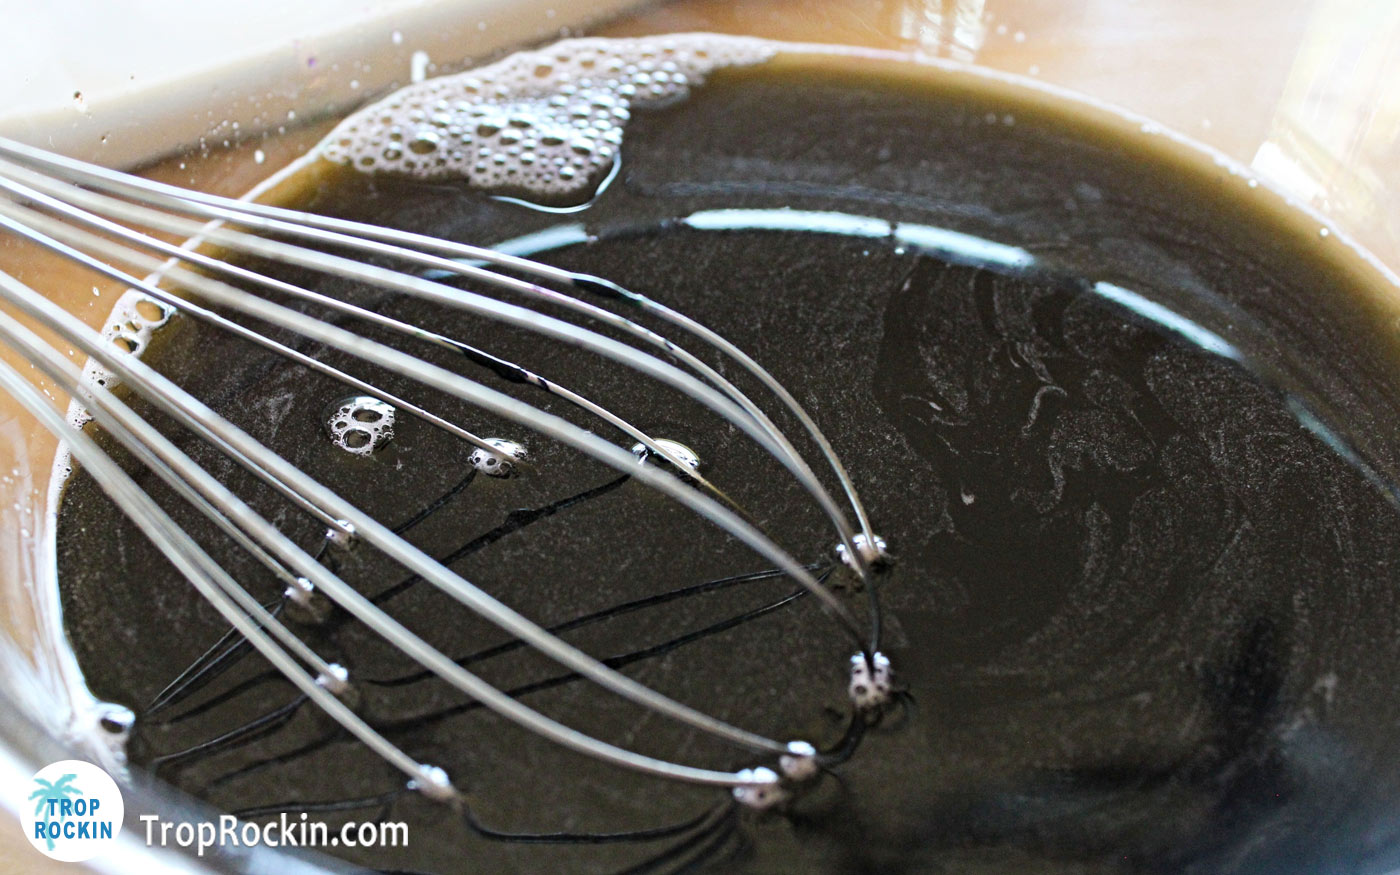 Liquid black jello in a bowl with whisk.